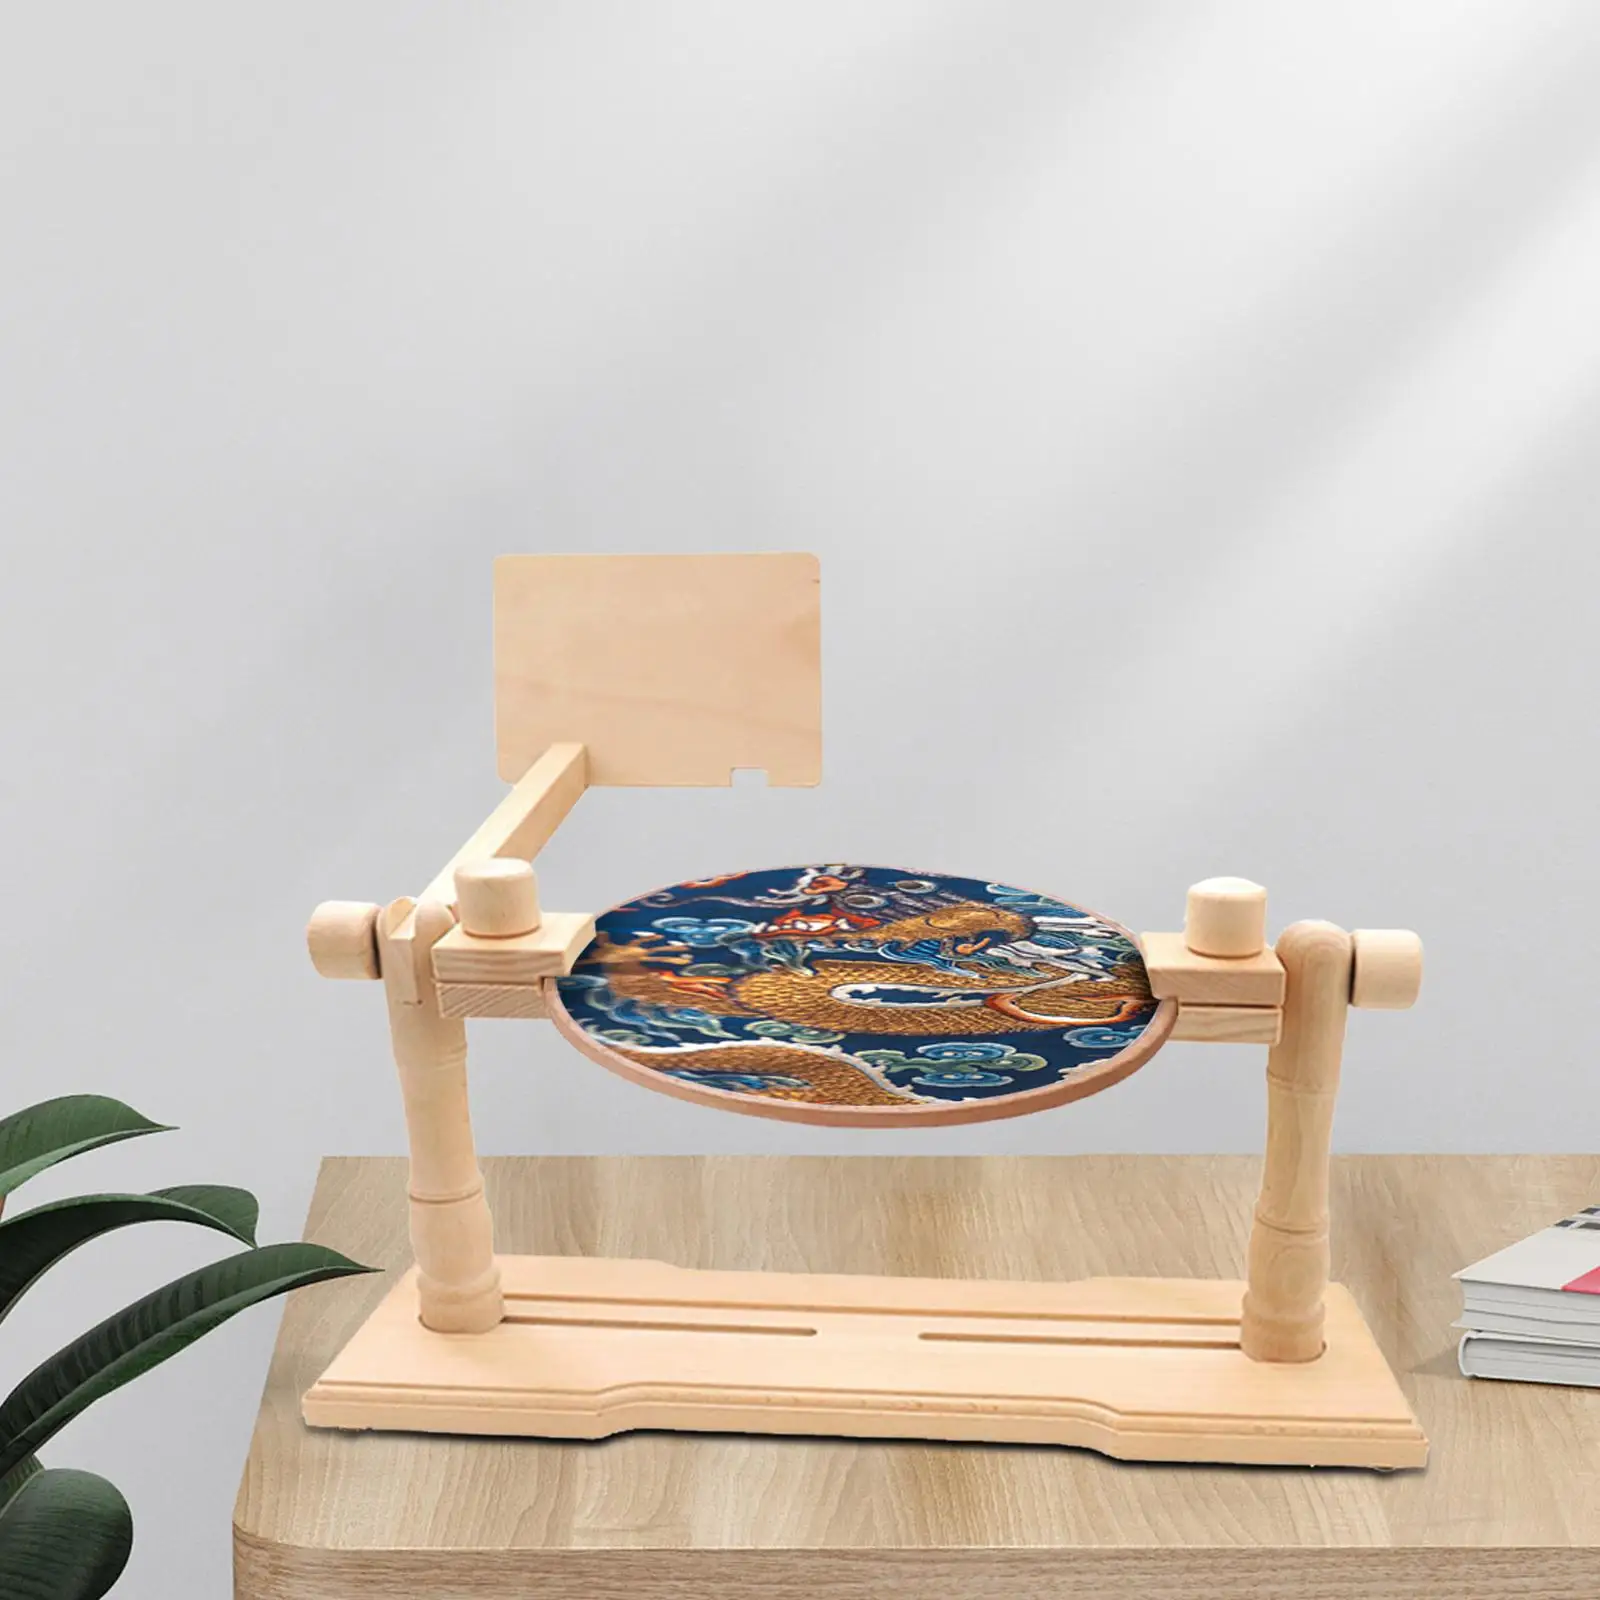 Wooden Embroidery Hoop Stand Rotated Adjustable Cross Stitch Rack Tabletop Embroidery Project Needlework Kids Girl